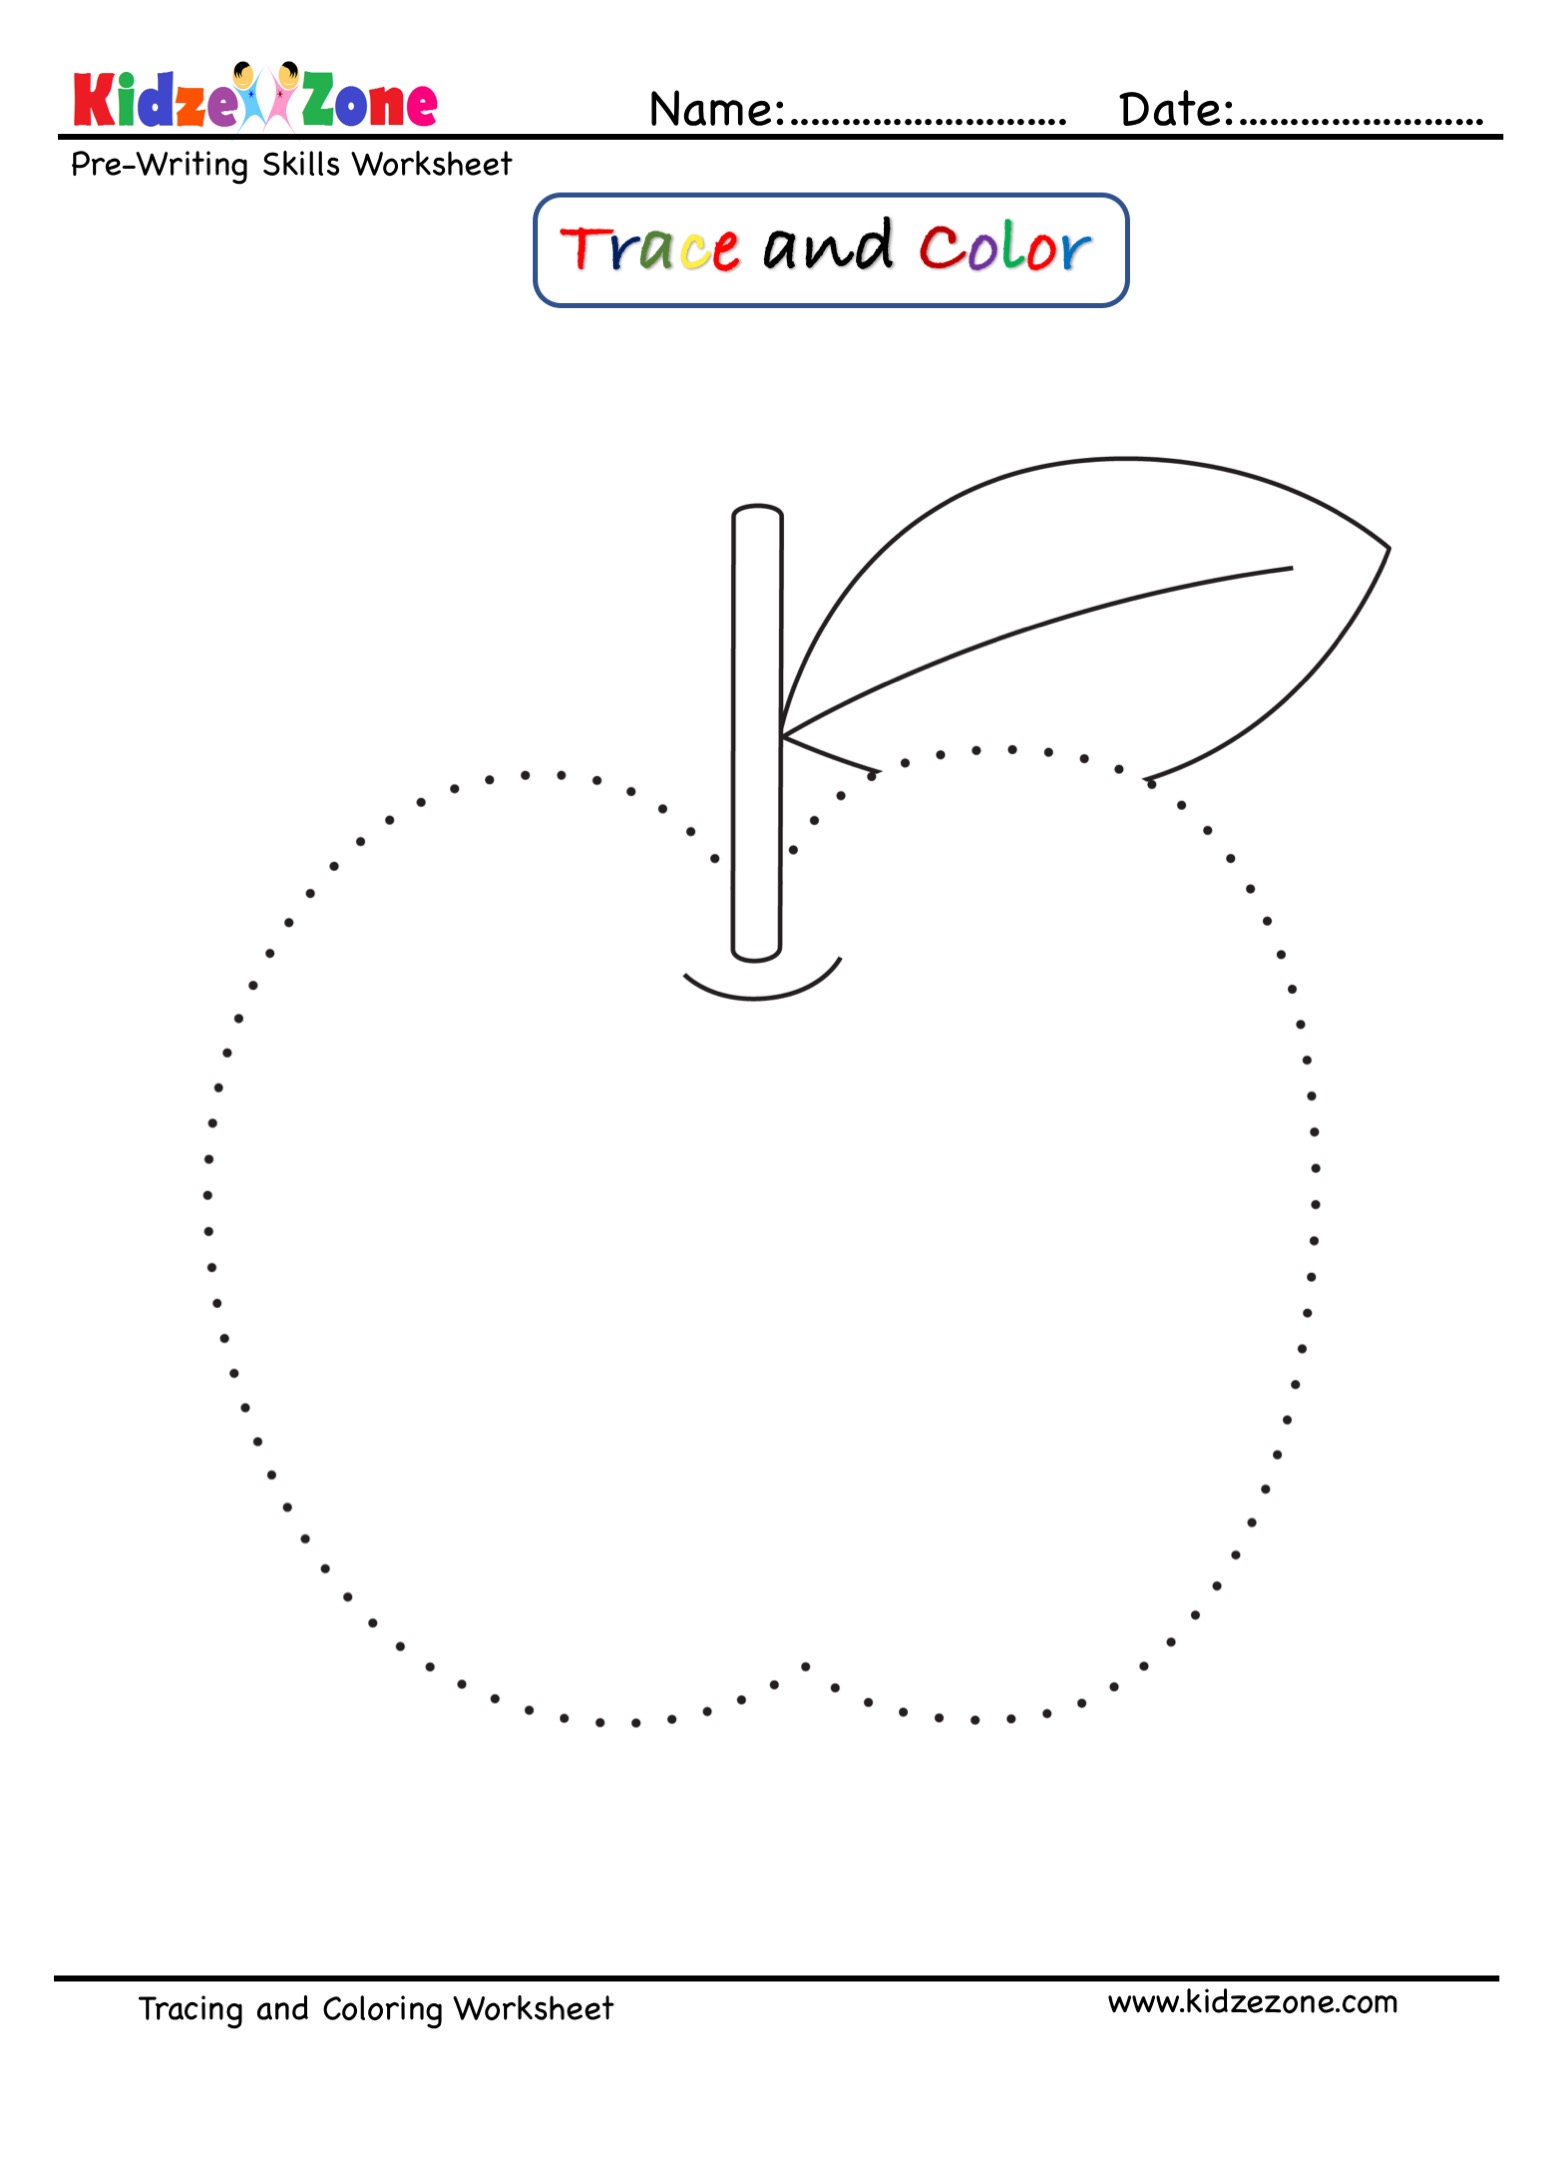 red-apple-tracing-worksheet-learning-school-toys-games-img-hospital